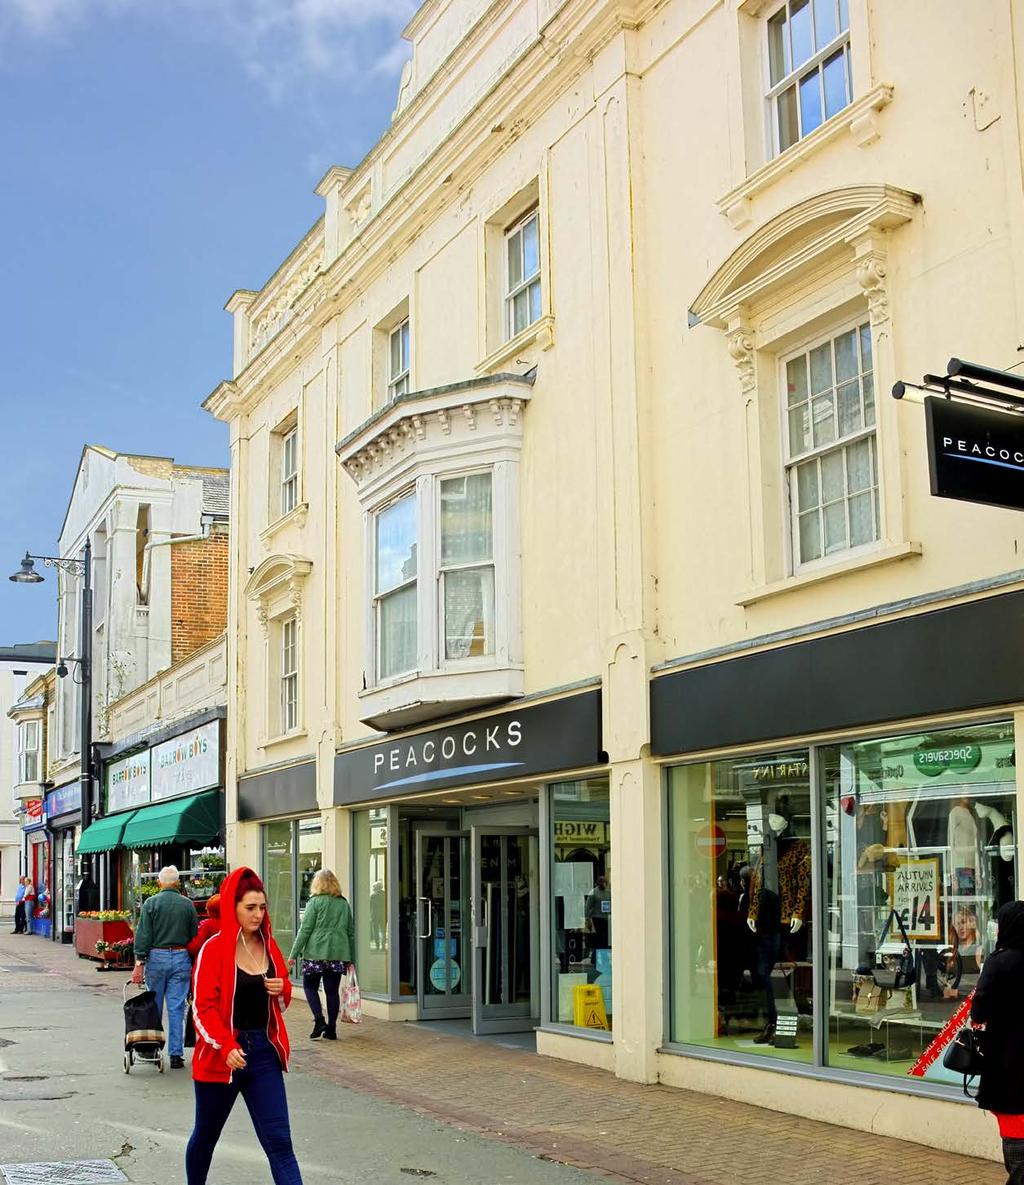 INVESTMENT CONSIDERATIONS n Prominent town centre retail investment with residential uppers n Ground and part 1st floor retail unit of 5,754 sq ft (535 sq m) n 5 self-contained 1 bed apartments to